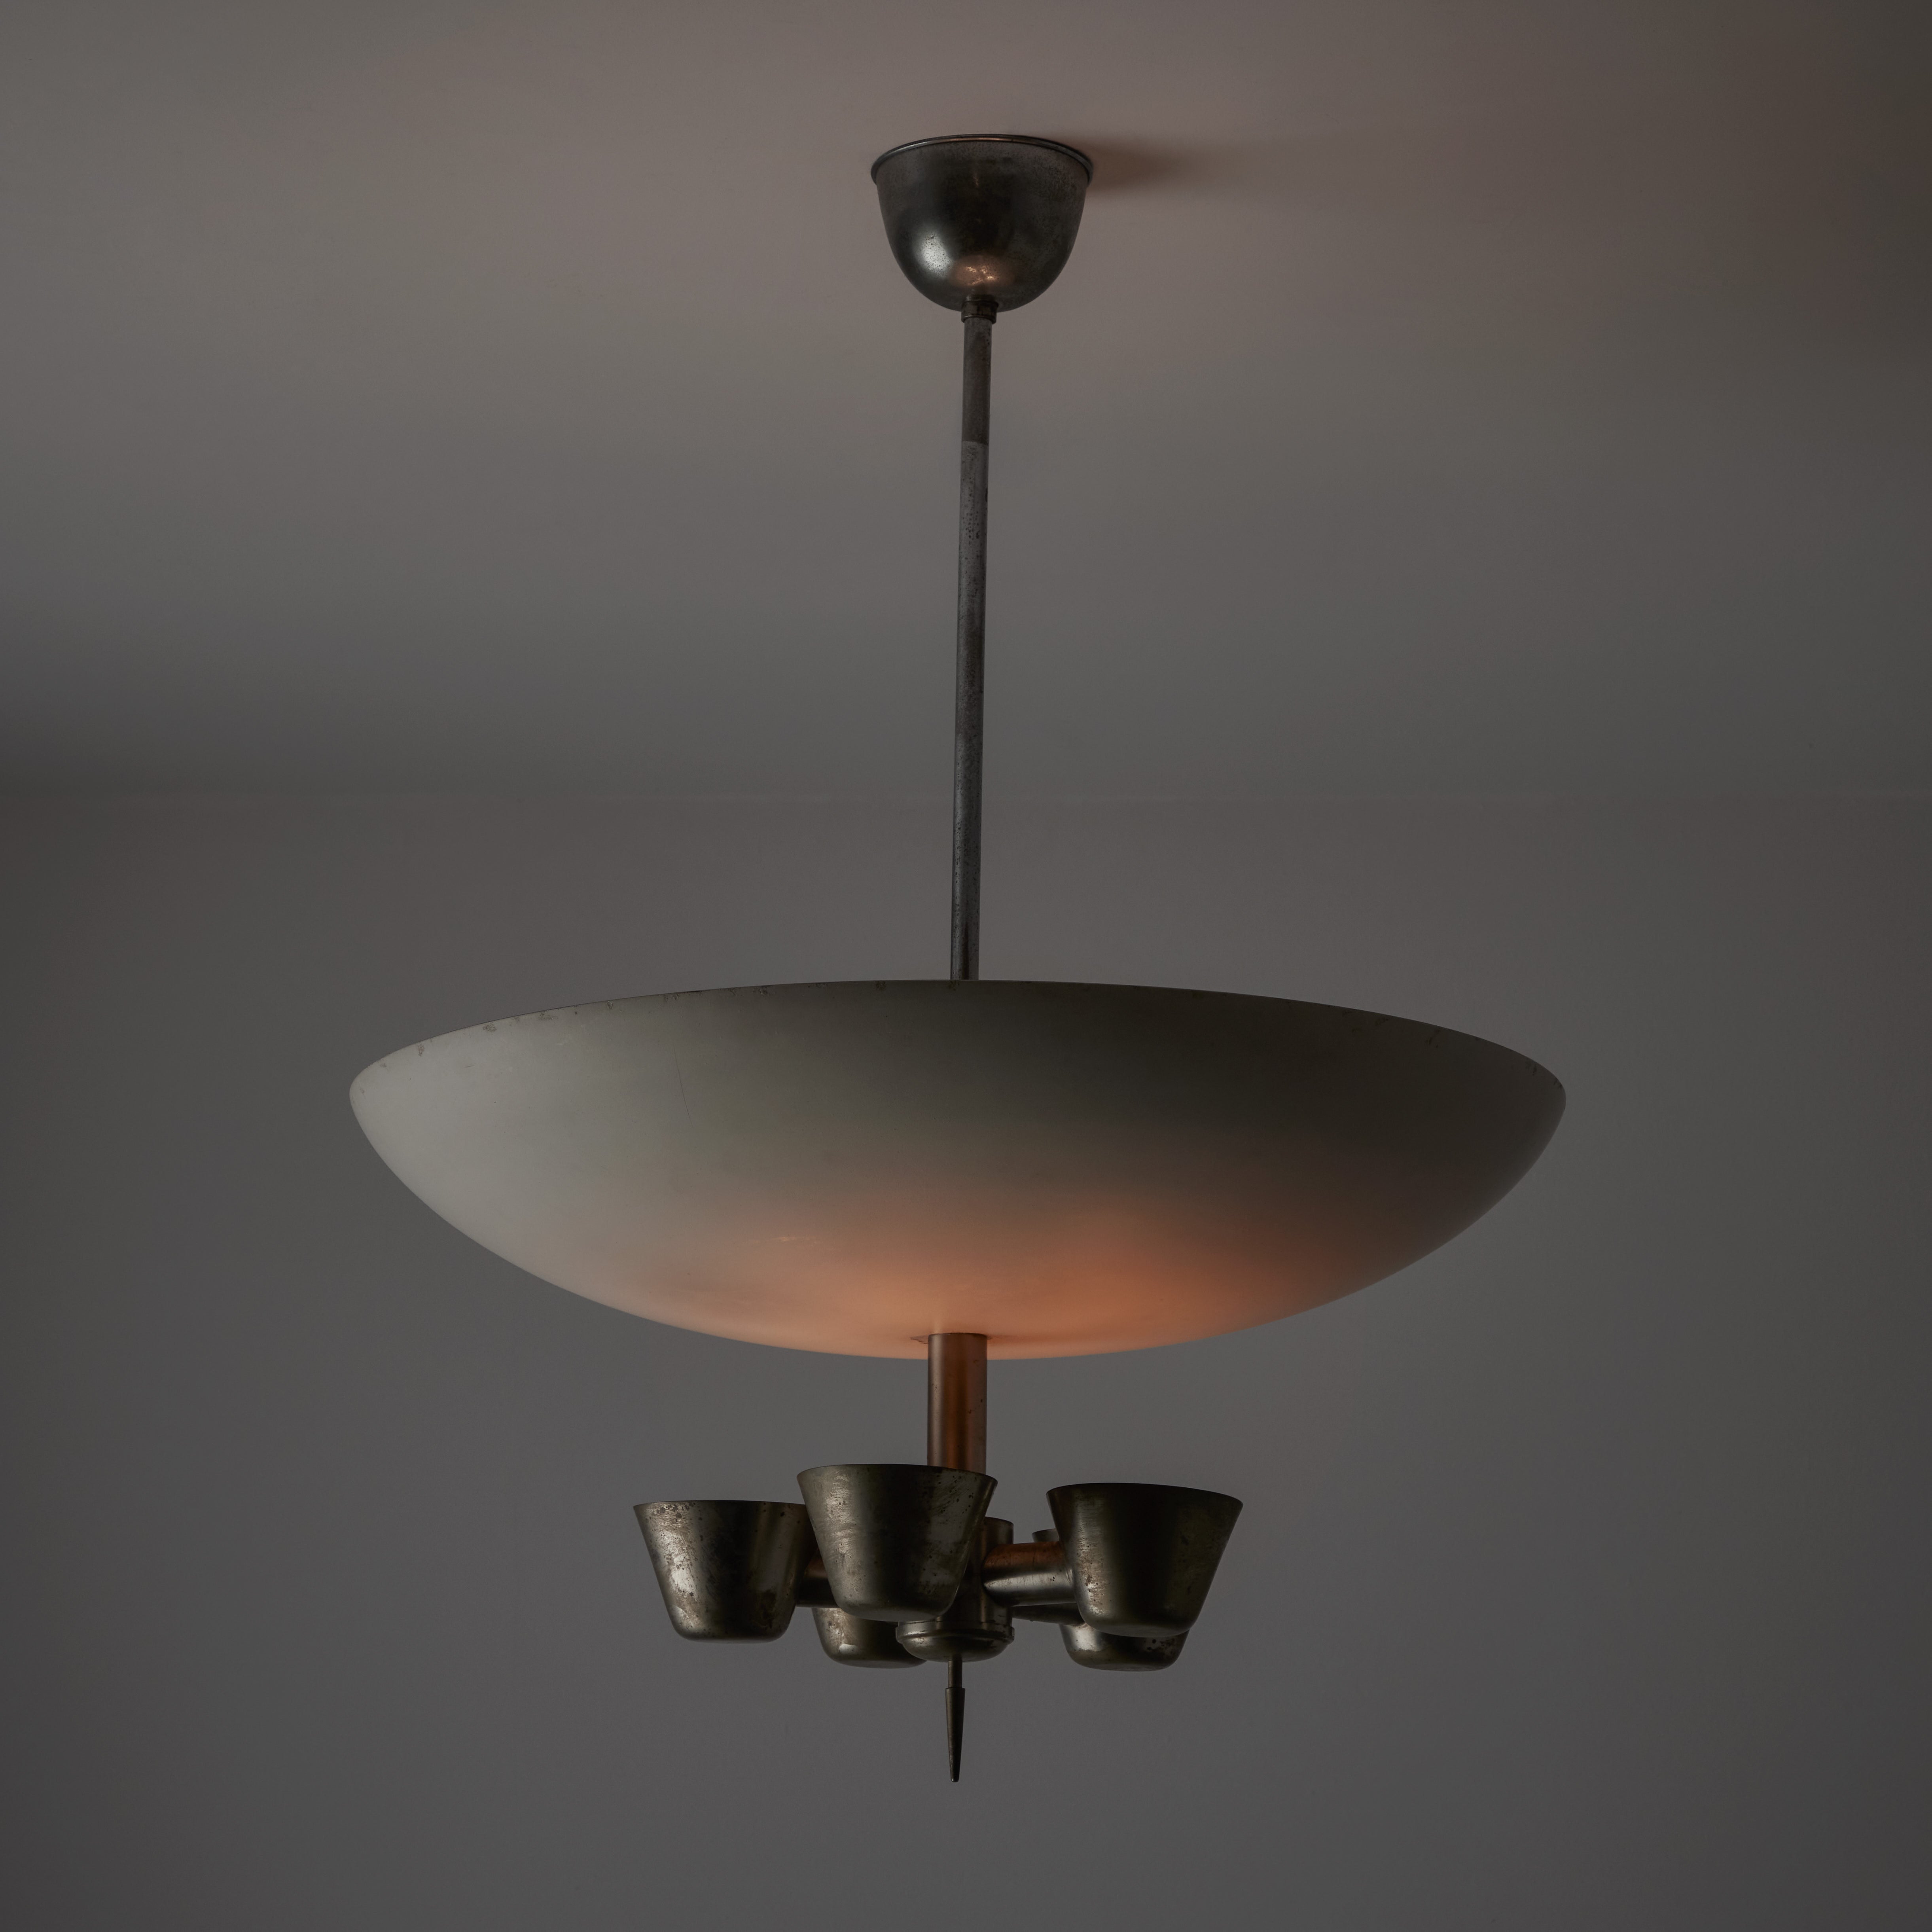 Rare ceiling light by Stilnovo. Designed and manufactured in Italy, circa the early 1950s. This is most likely a first edition and very rare make from Stilnovo. A gothic ceiling lamp featuring a lower 5 socket brass sequence which is met by an upper